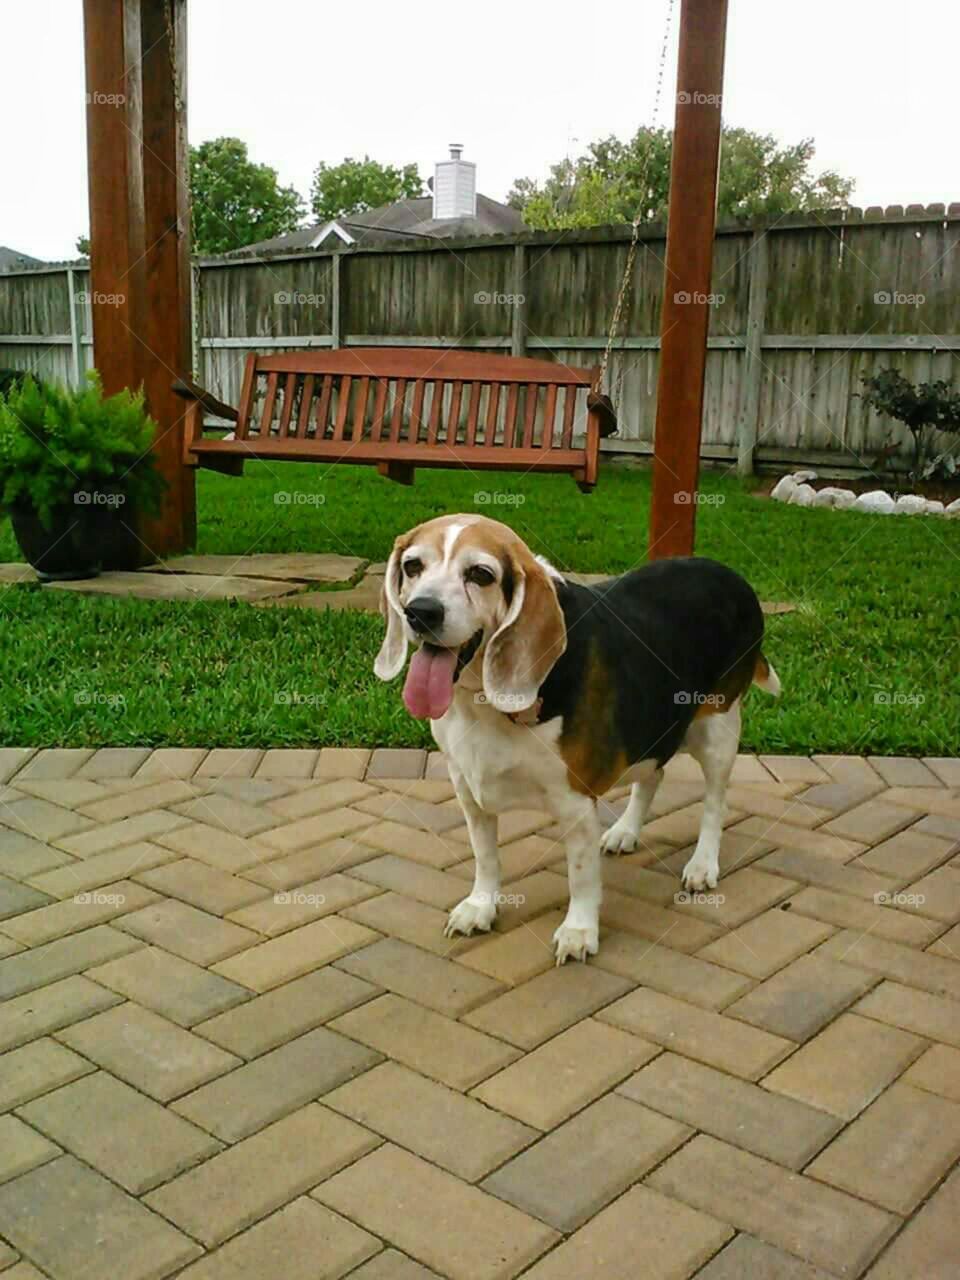 Beagle grass miss Molly female dog swing outdoors tongue happy healthy